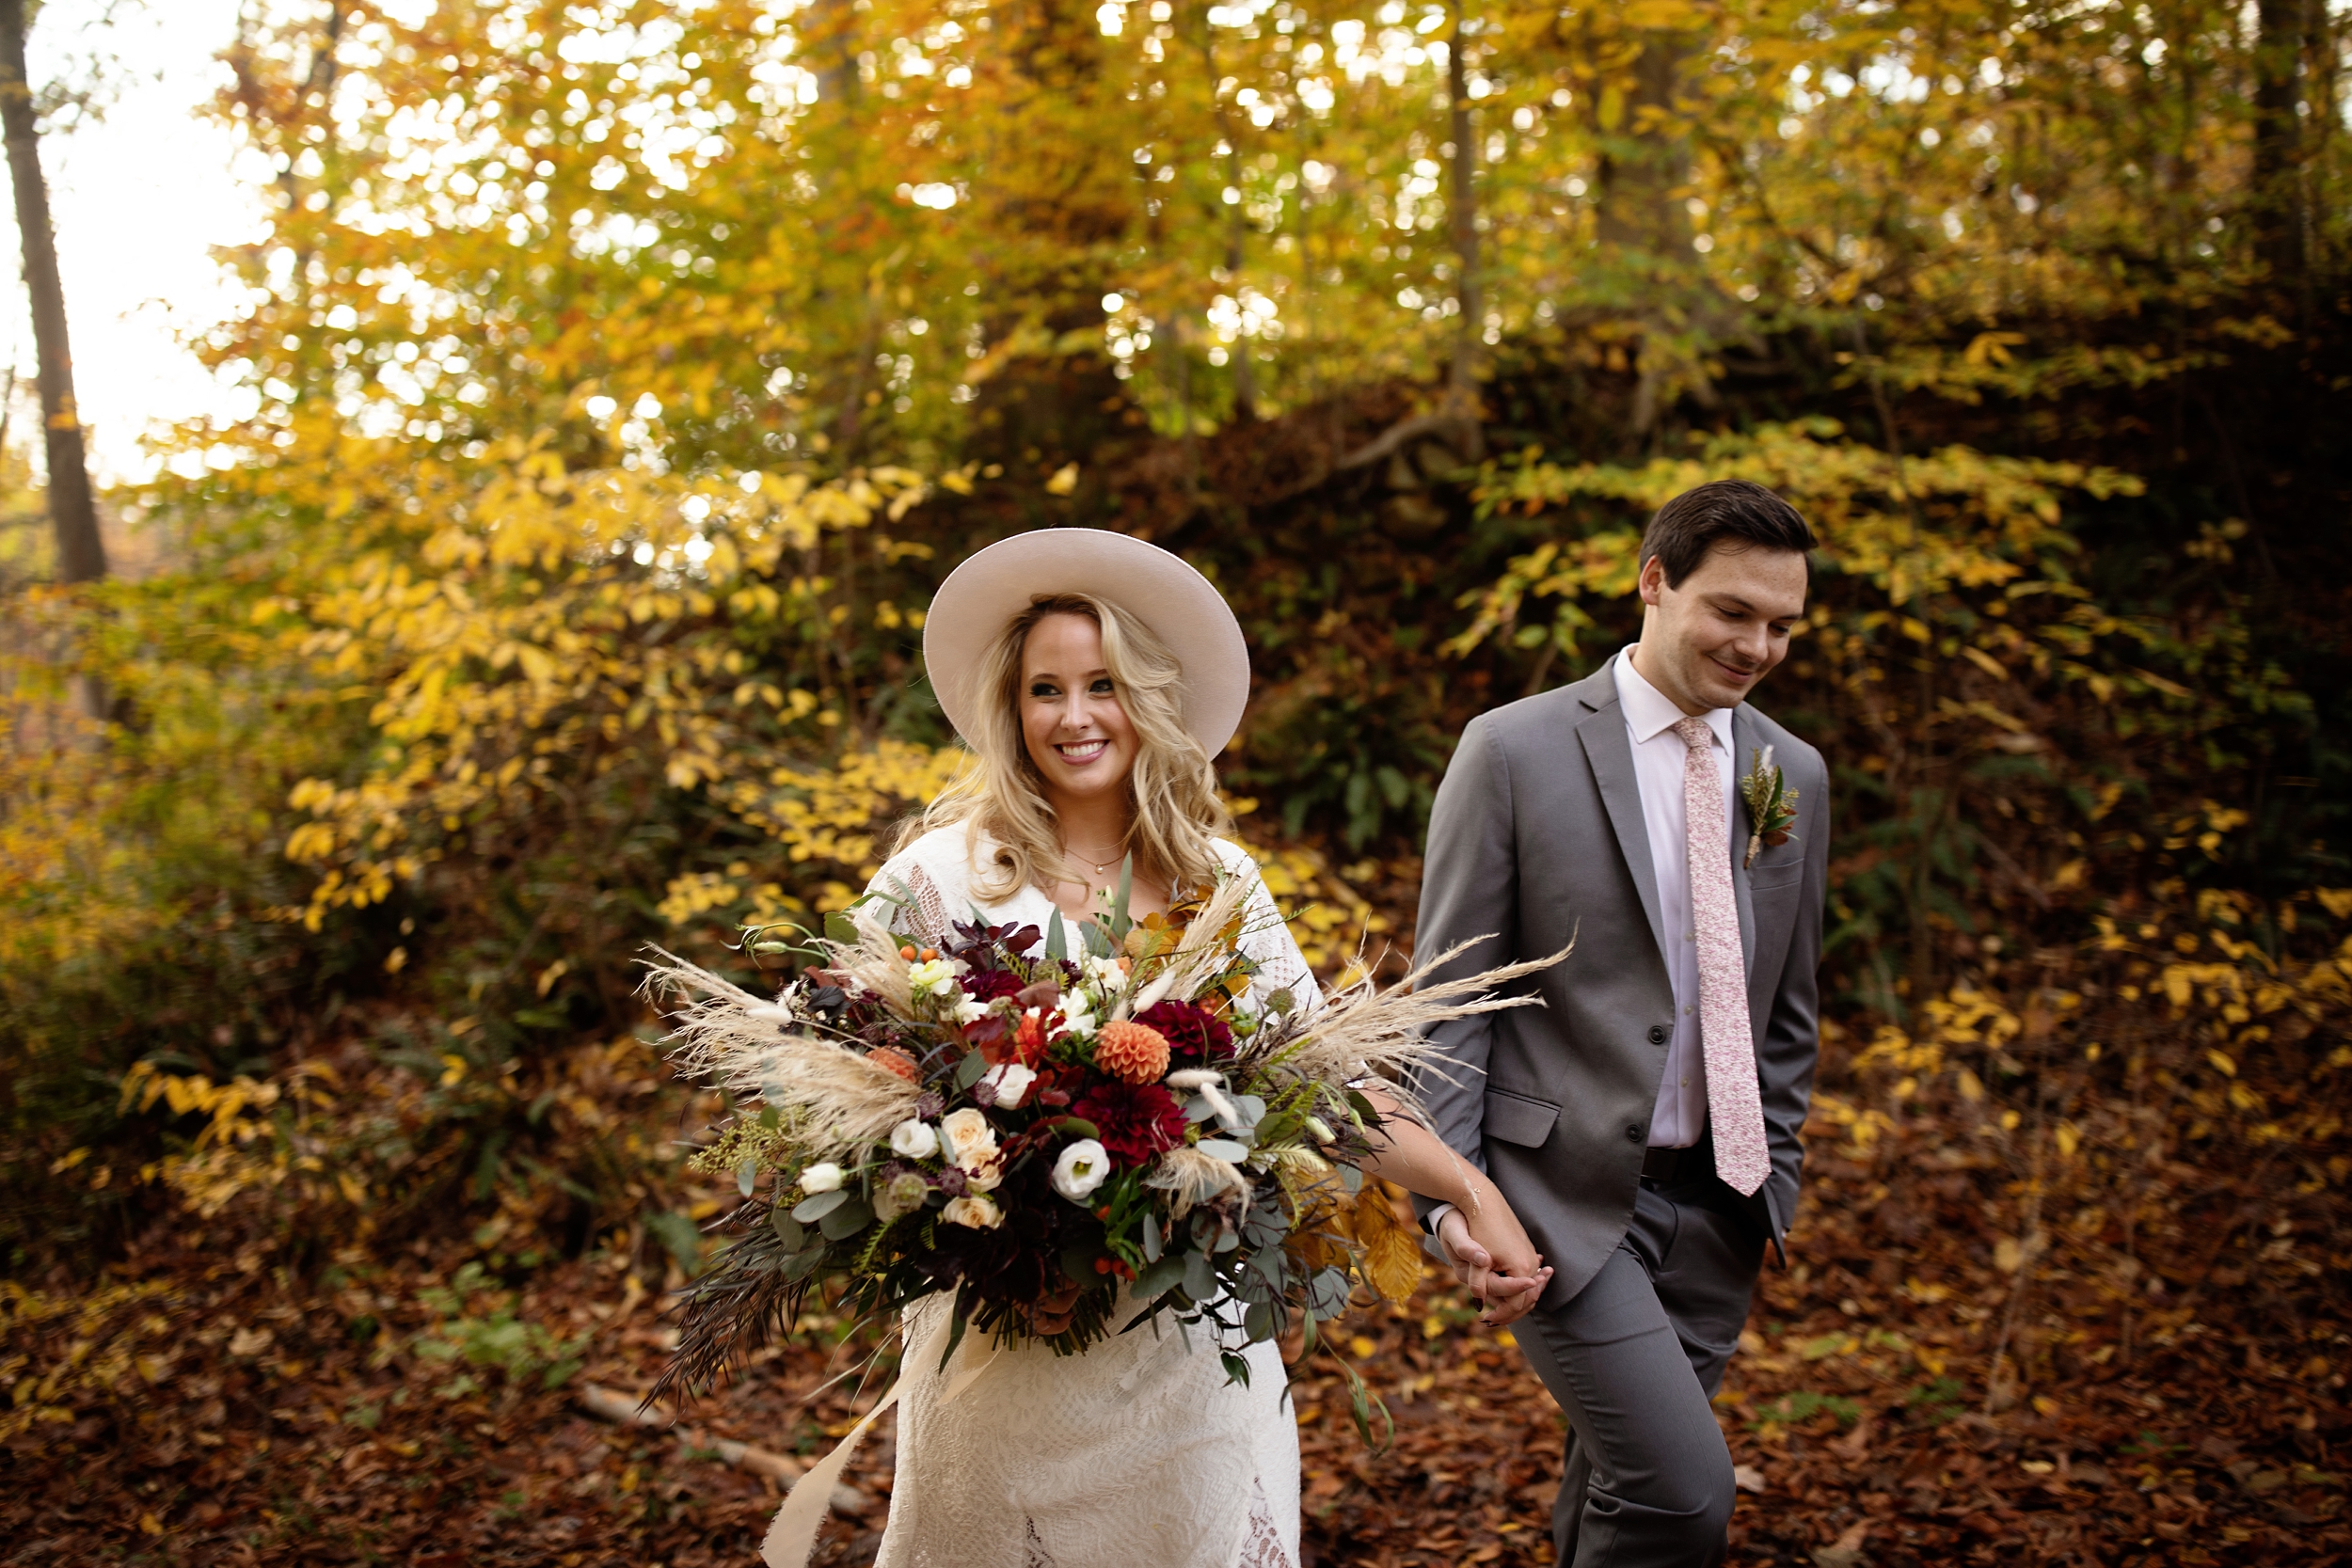 Boho Elopement at Hibernia Park in Coatsville, PA. macrame ceremony backdrop and whimsical, boho, dried florals. Bride is wearing a BHLD gown and a white hat.